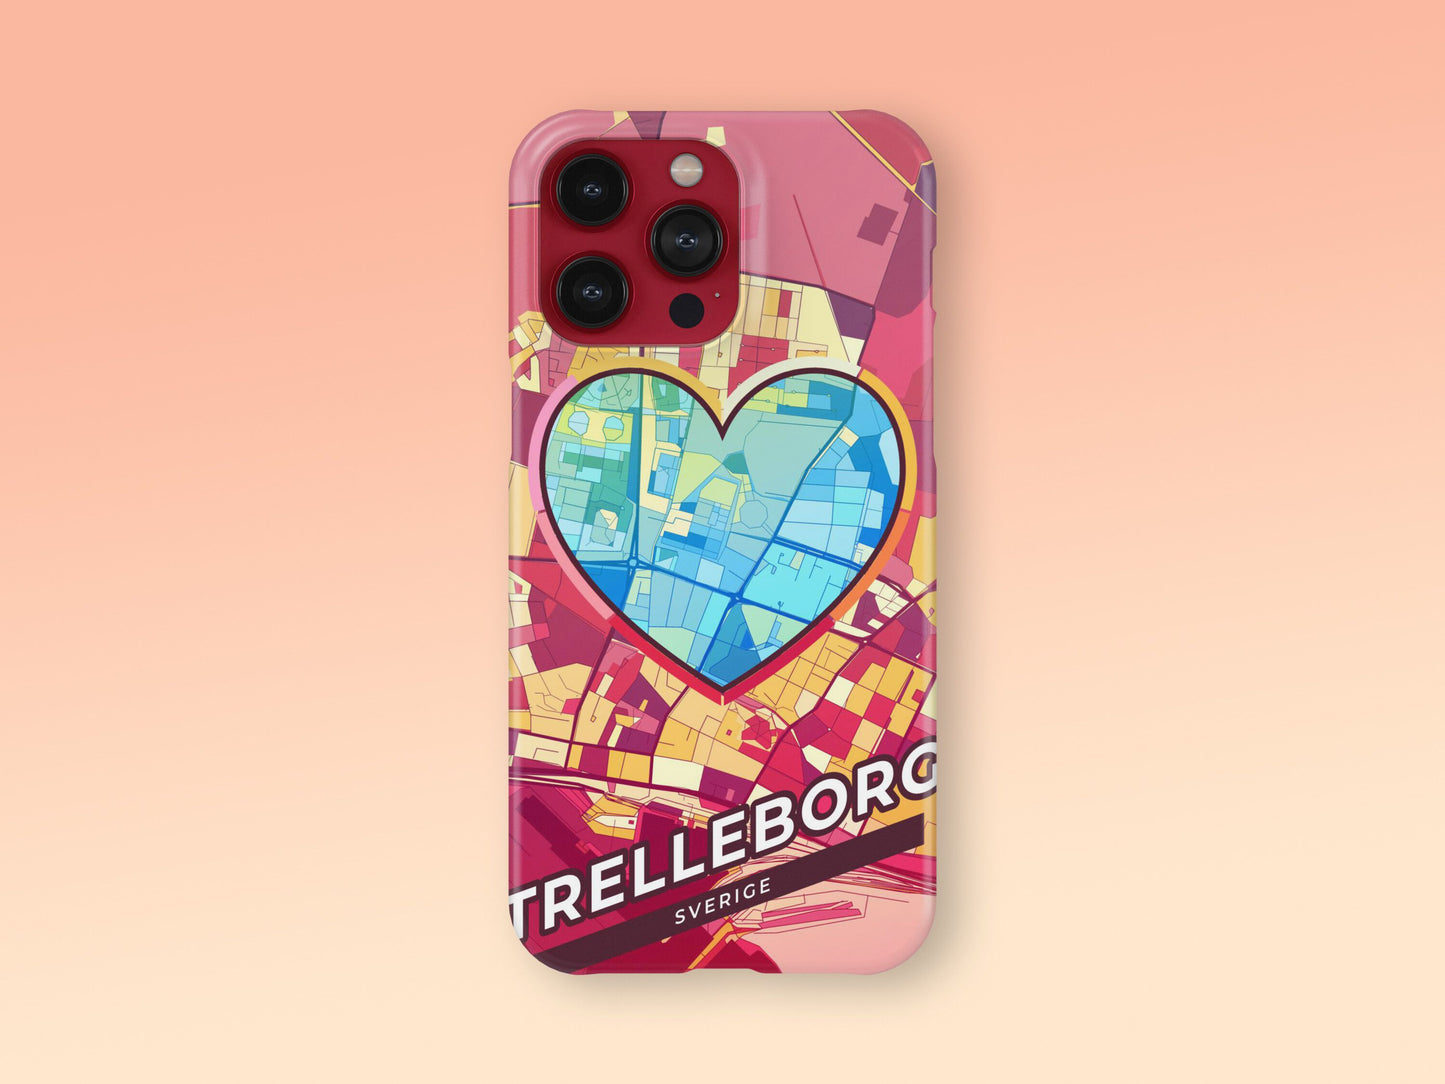 Trelleborg Sweden slim phone case with colorful icon 2